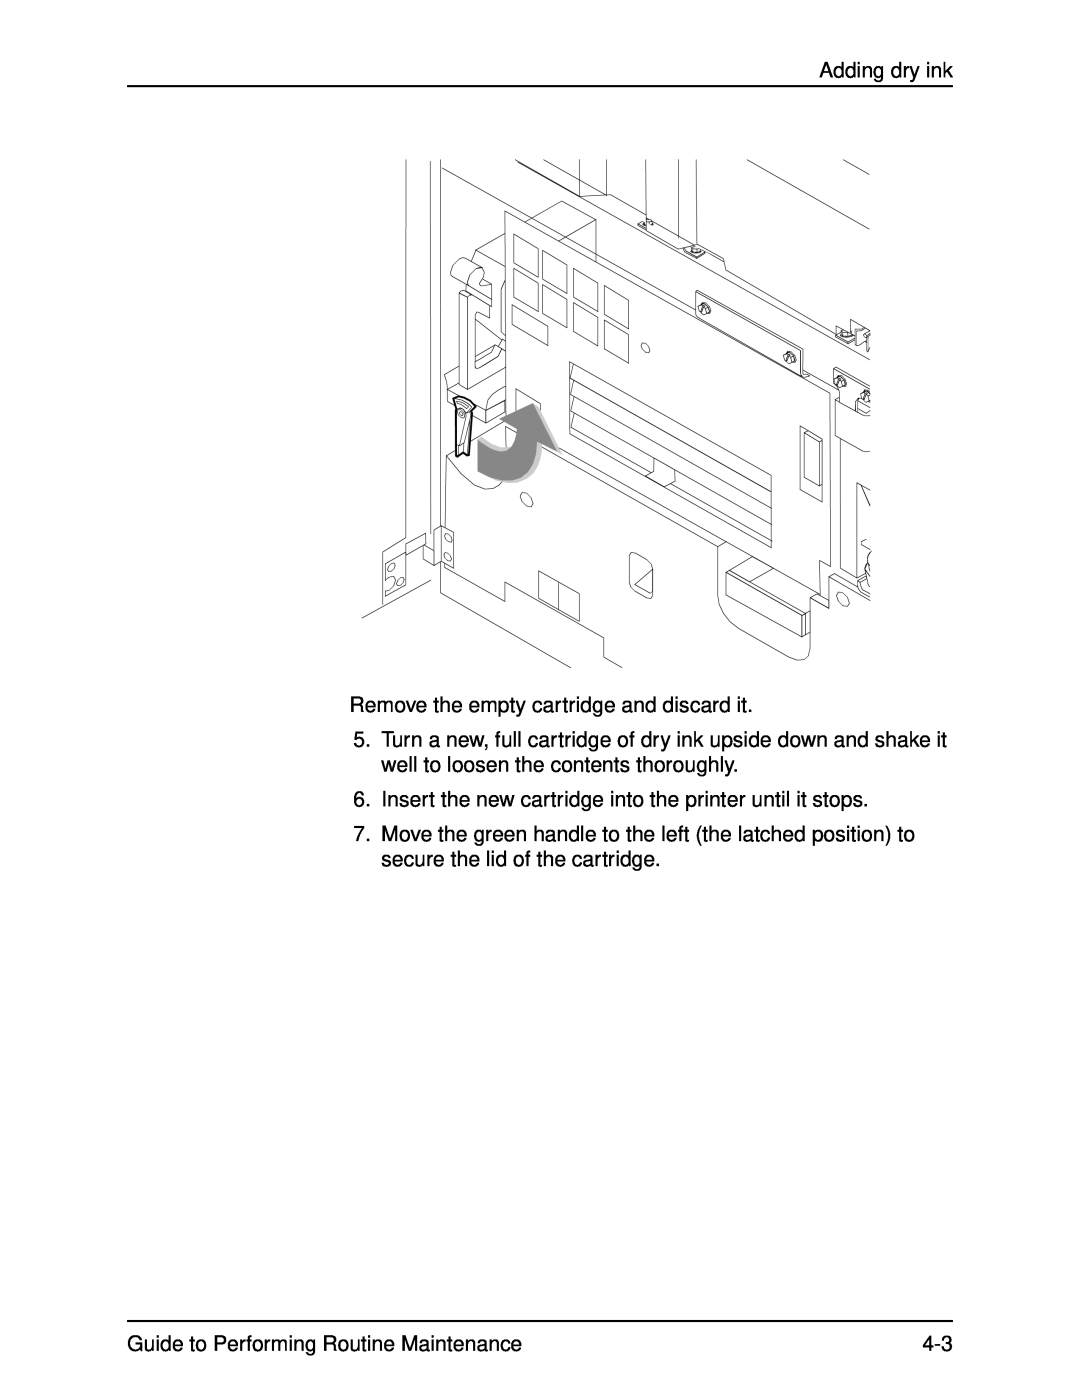 Xerox DocuPrint 96 manual Adding dry ink Remove the empty cartridge and discard it, Guide to Performing Routine Maintenance 